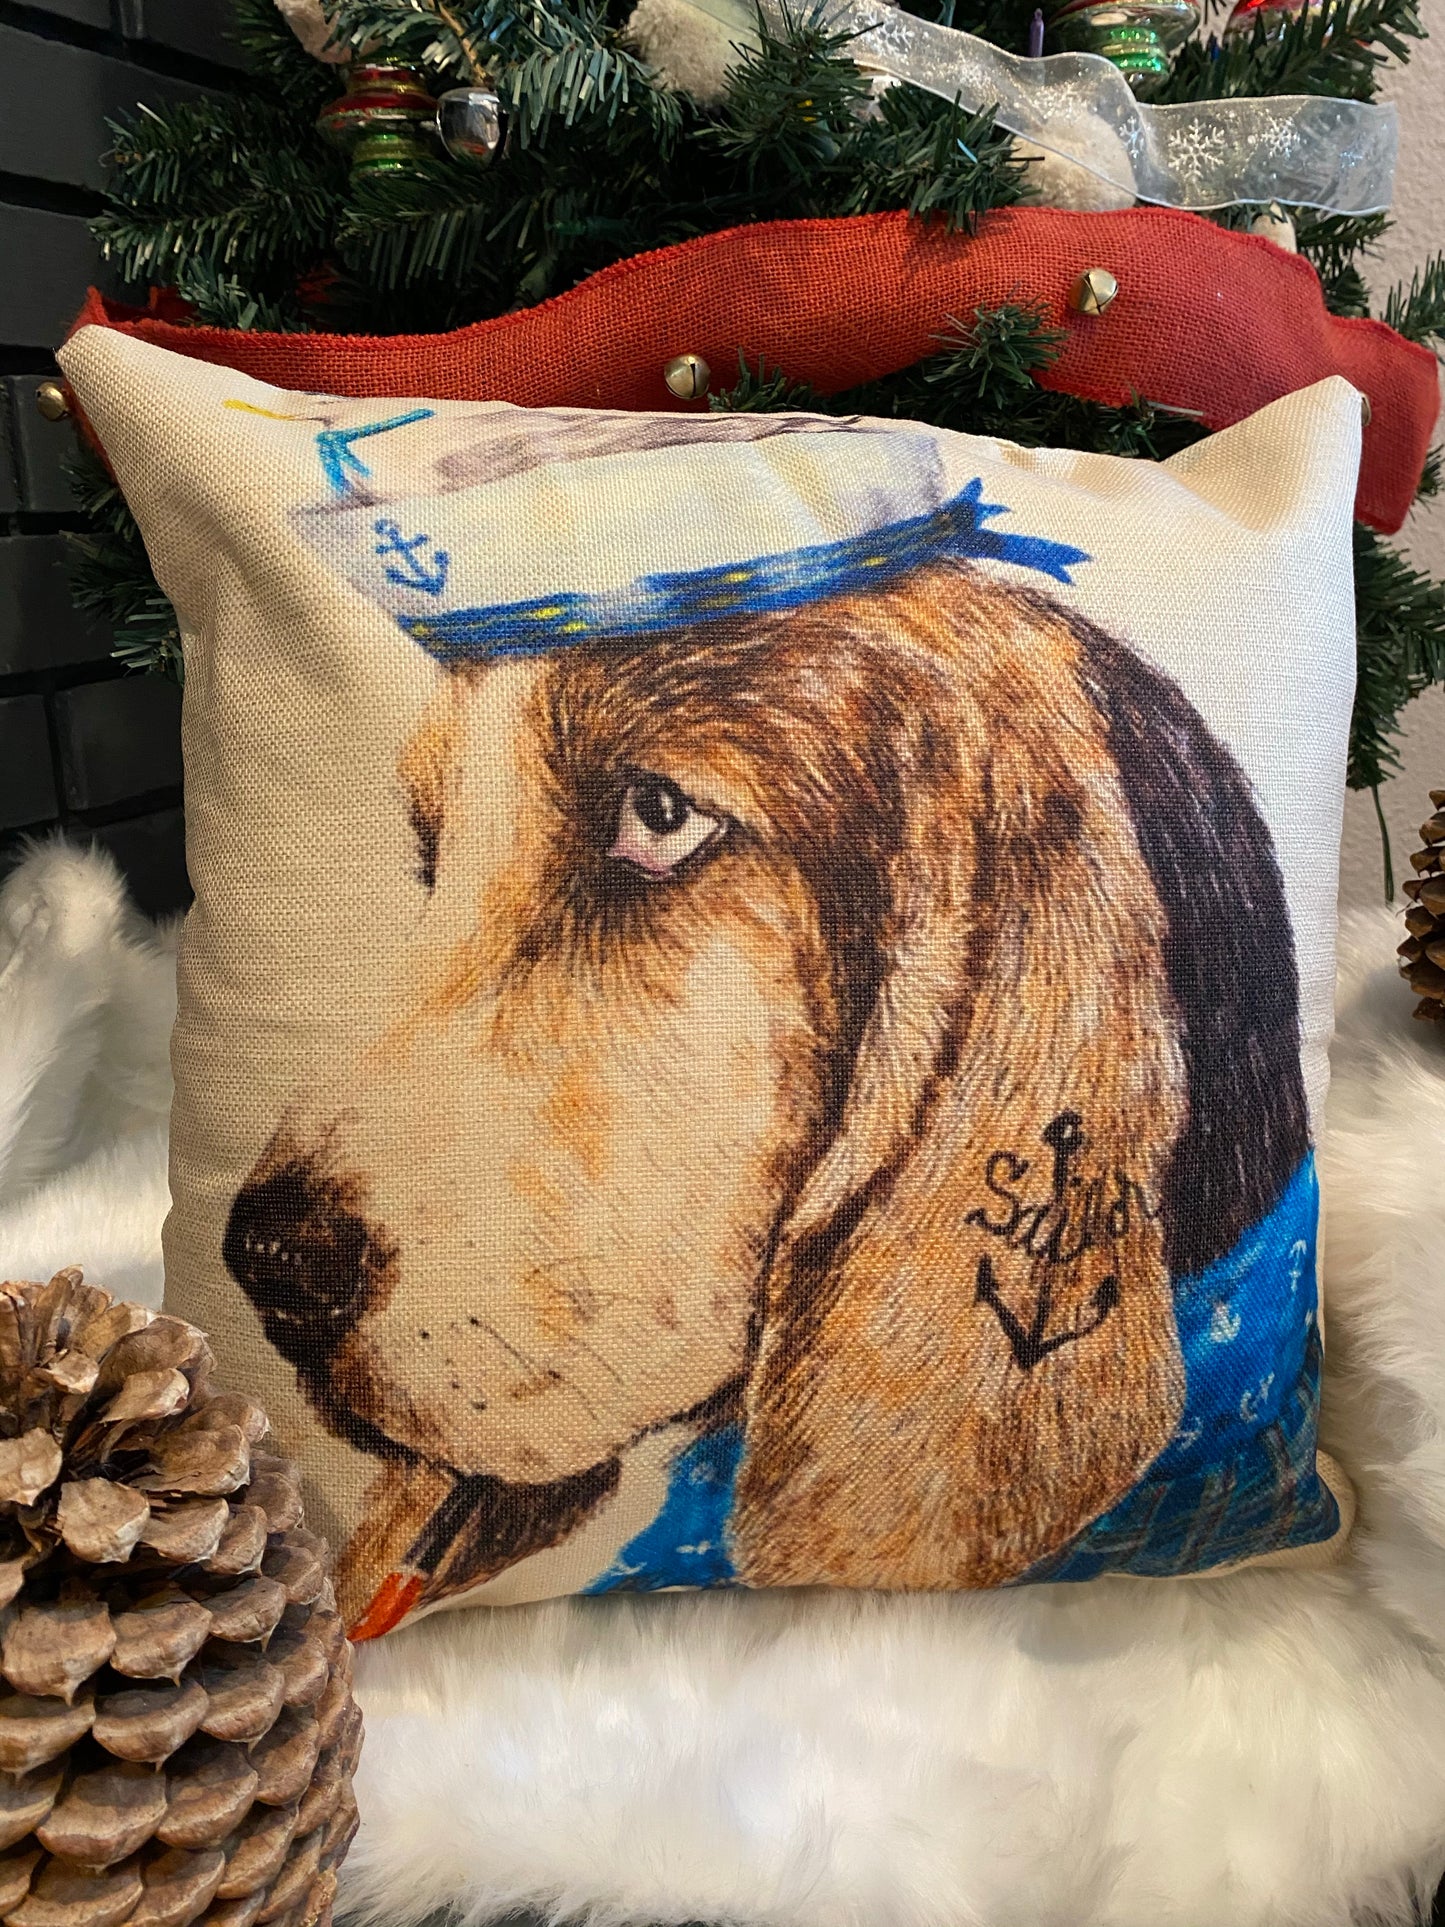 Basset Hound Sailor with Pipe and Blue Shirt Pillowcase | Hush Puppies Pillows